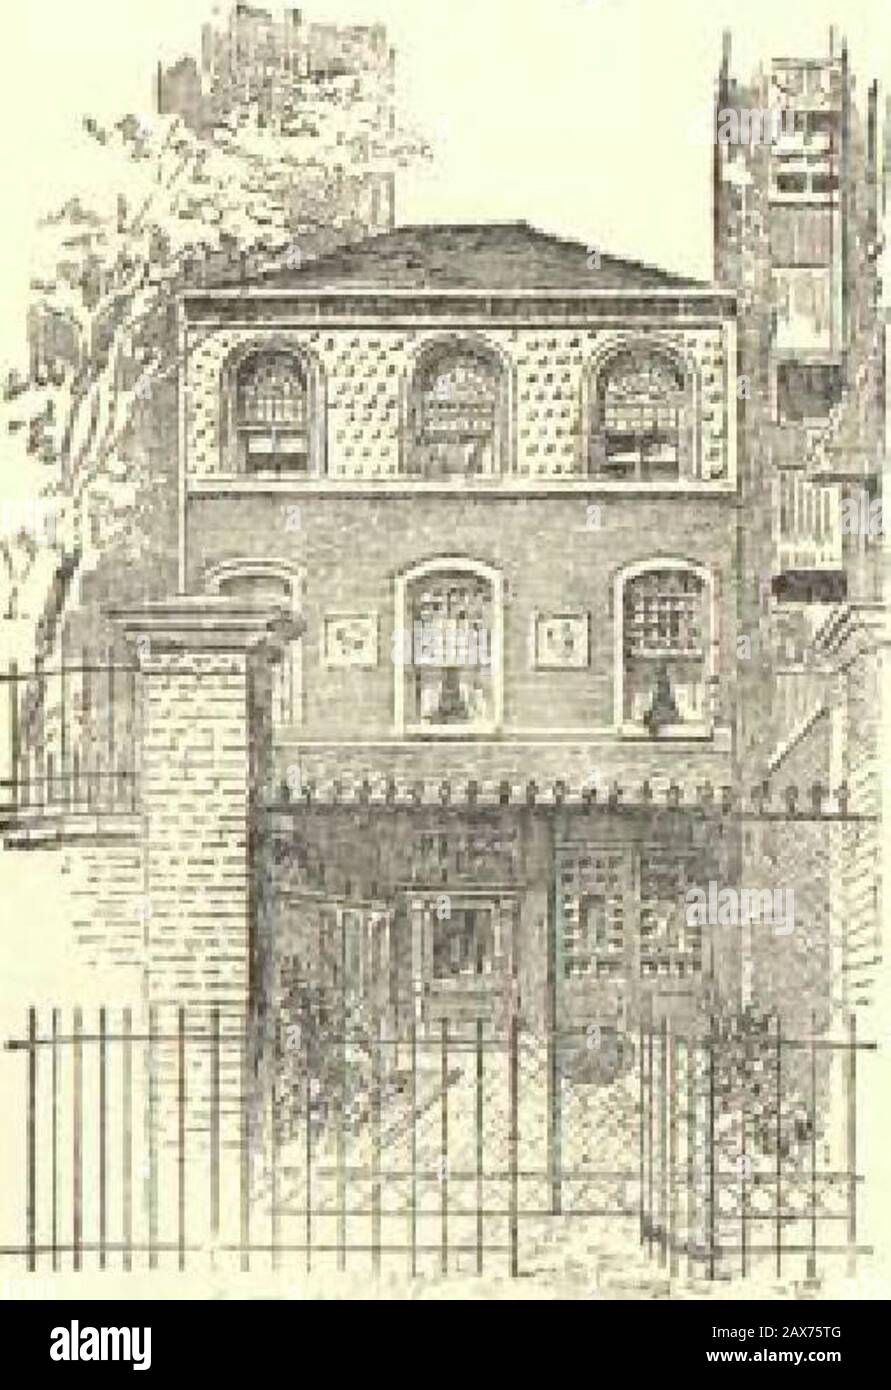 Literary New York . Literary New York Post. Only a few steps away, in his-toric Irving Place, the ivy-coveredhouse is where Mrs. Burton Harrisonwrote Sweet Bells out of Tune, andon another block farther to the souththe Lotus Club long had its home,the building now given over to com-mercial uses. In the short stretch of FifteenthStreet that leads from Irving Placeto Union Square are two pointsclosely associated with the literatureof the city. One is midway the dis-tance, the prosaic office of a brewernow, but oncethe home of theCentury Clubwhen Bancroftthe historianwas its presi-dent. Theother Stock Photo